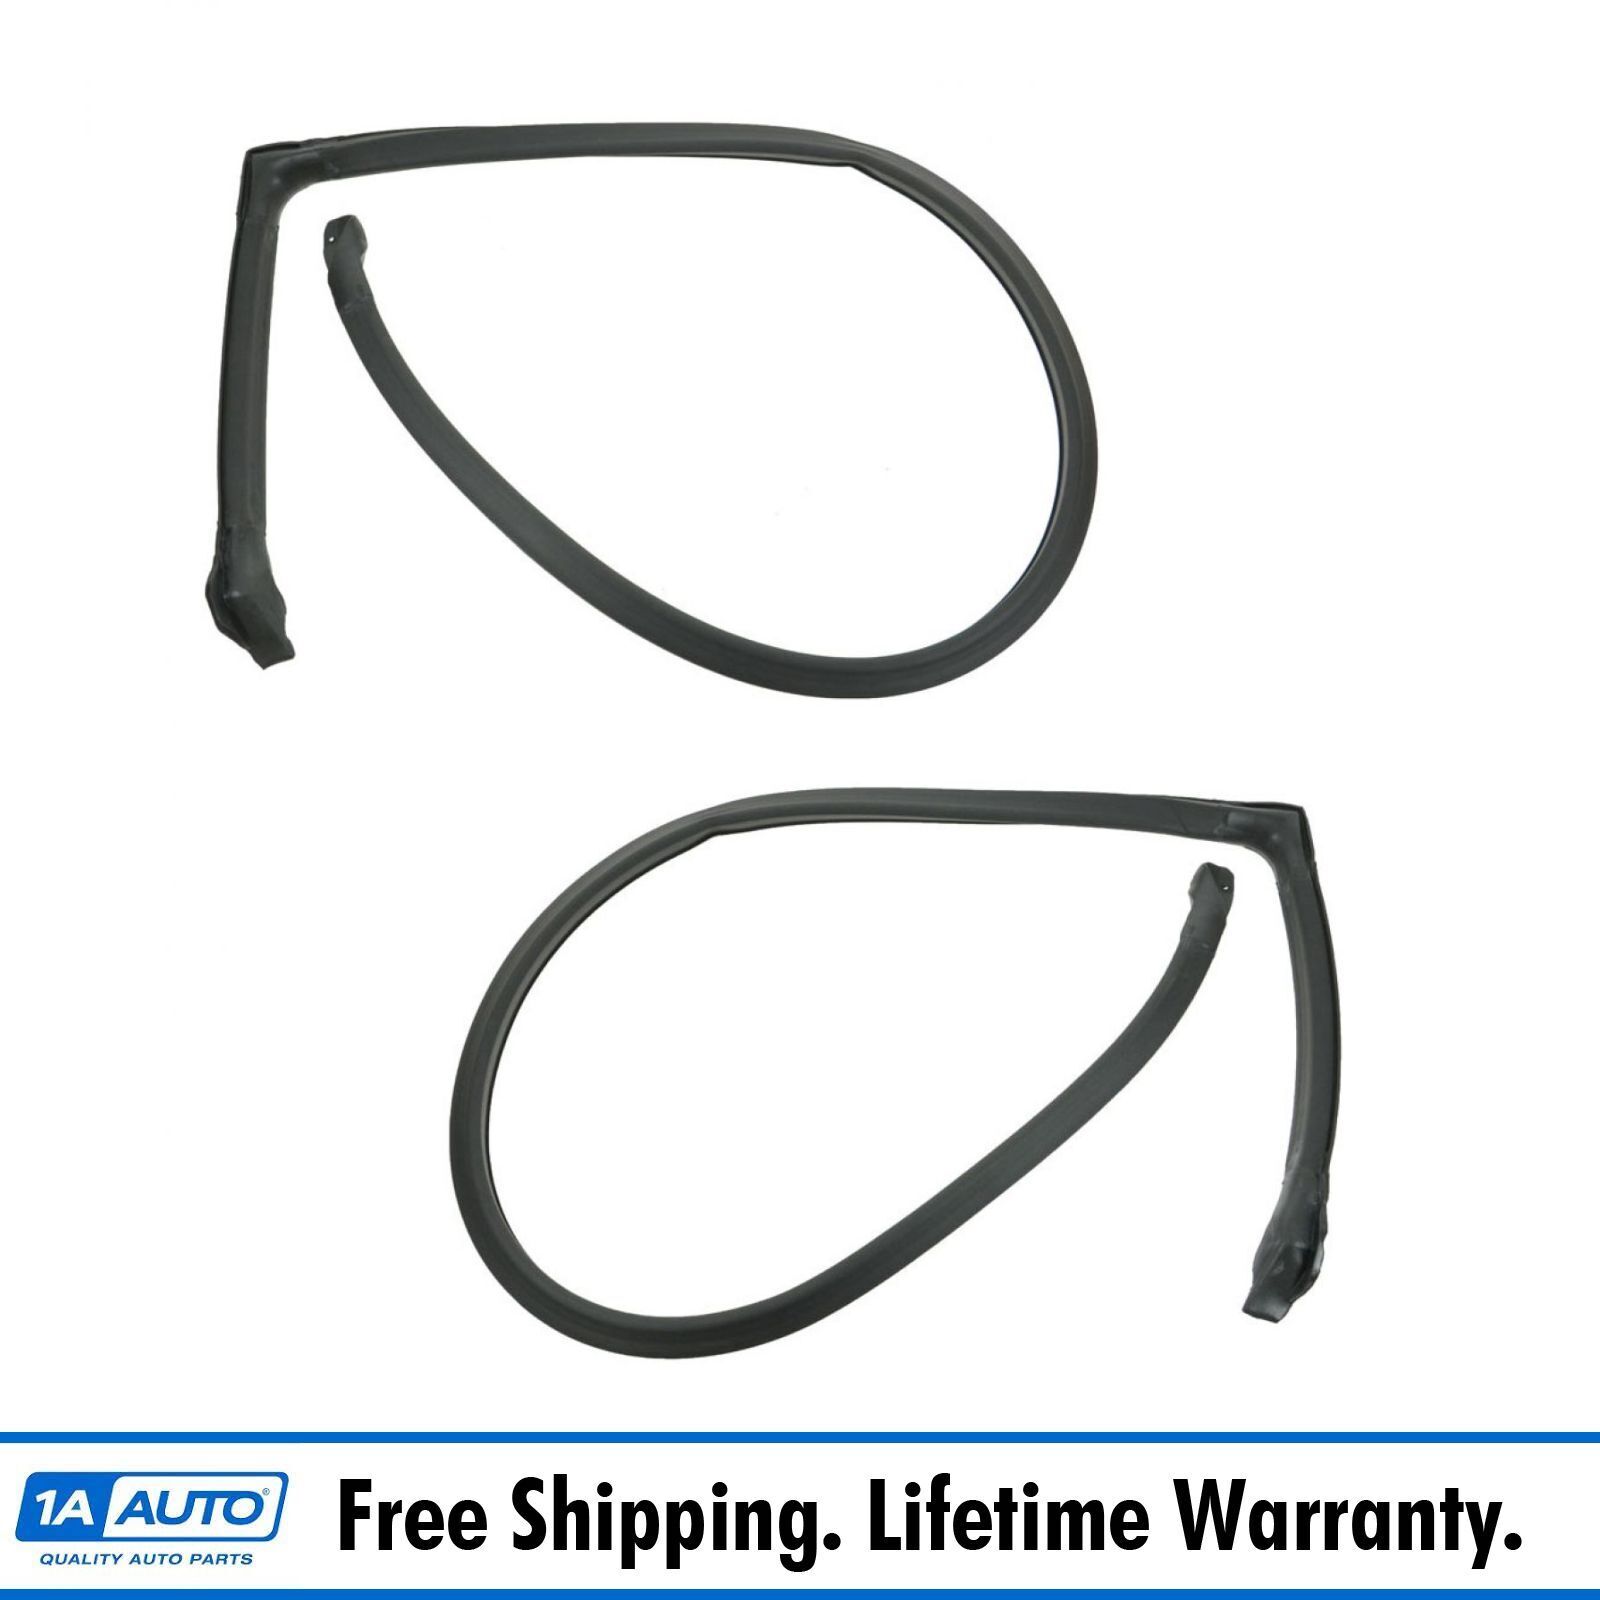 Roof Rail Weatherstrip Seals Pair for 76-80 Plymouth Volare Aspen